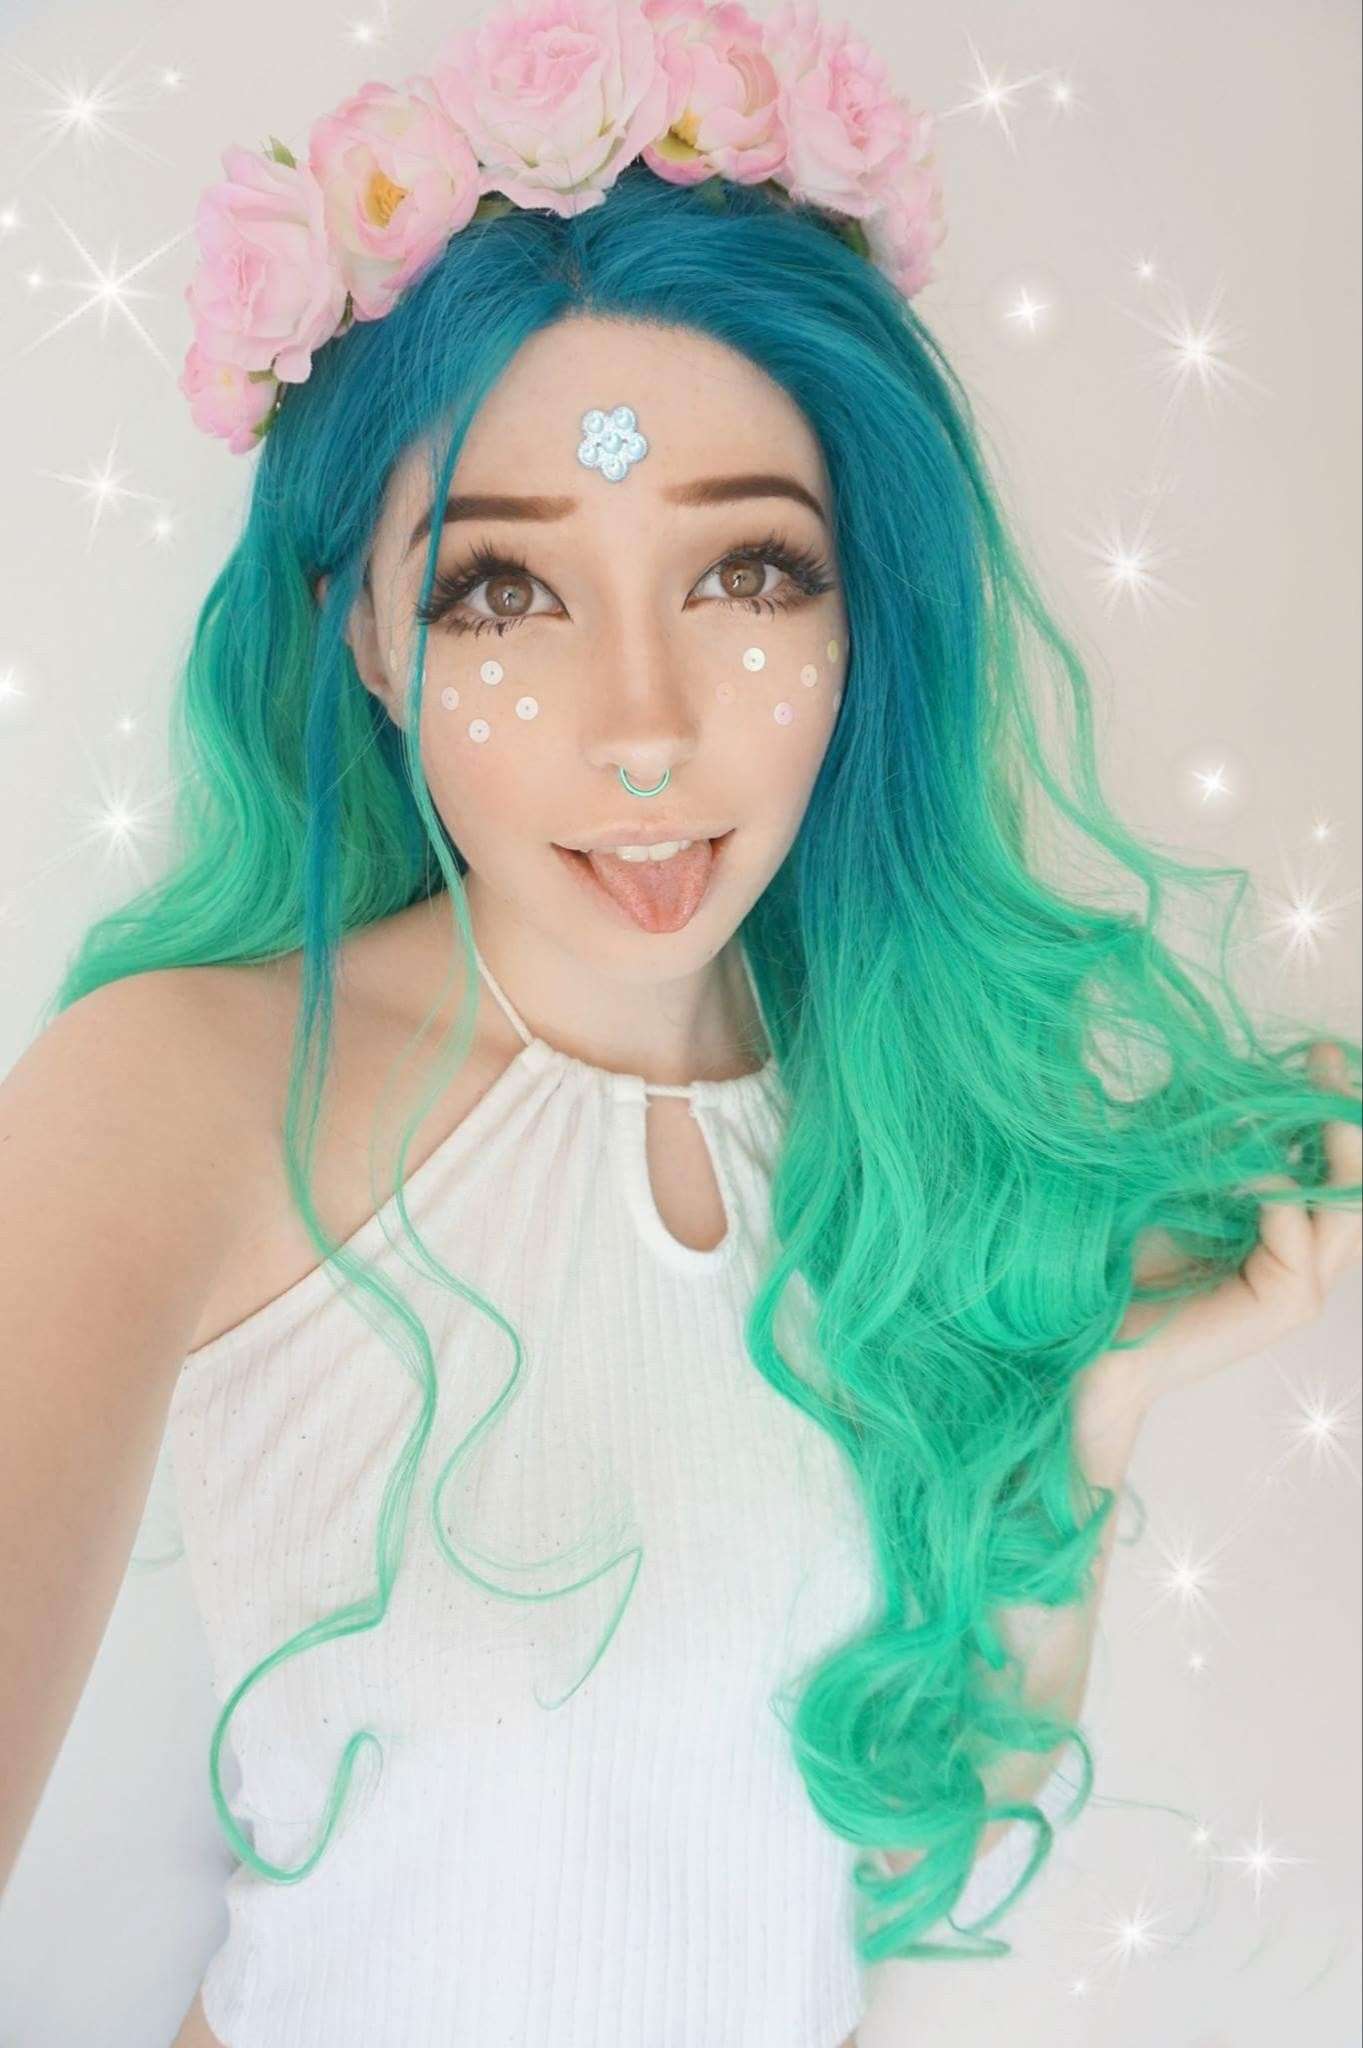 Belle delphine without wig and makeup